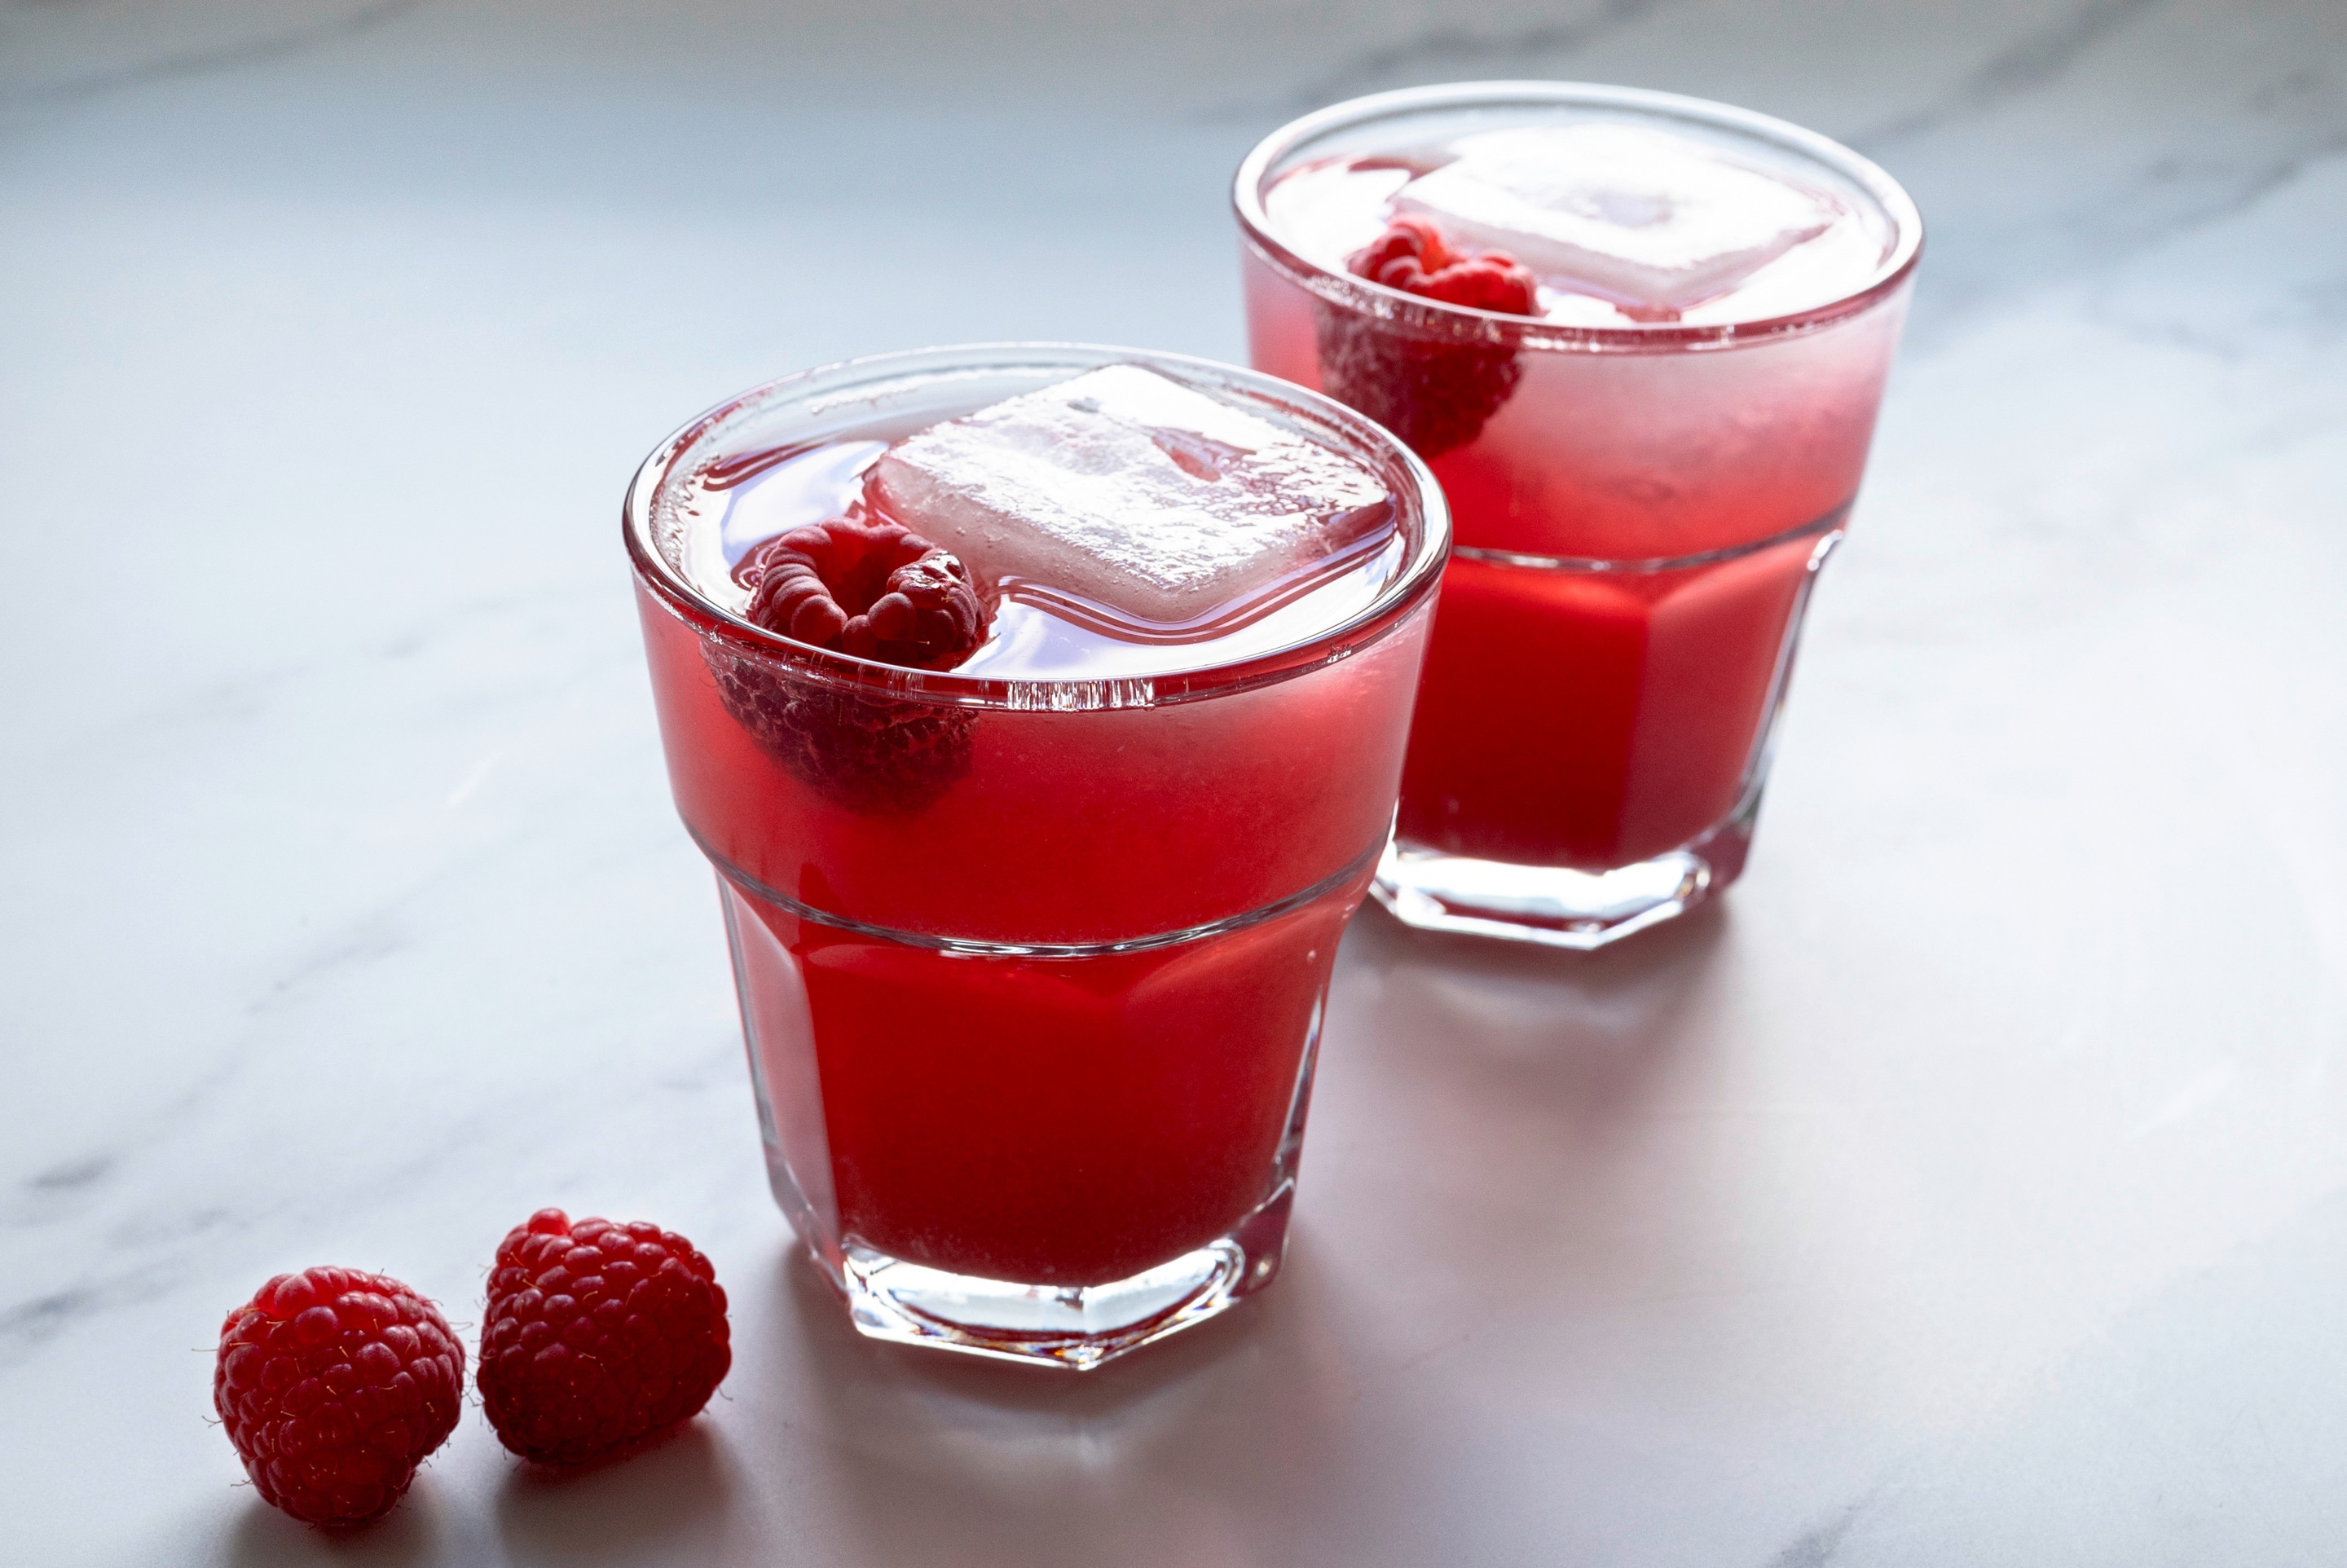 Turn over-ripe raspberries into delicious summer cordial